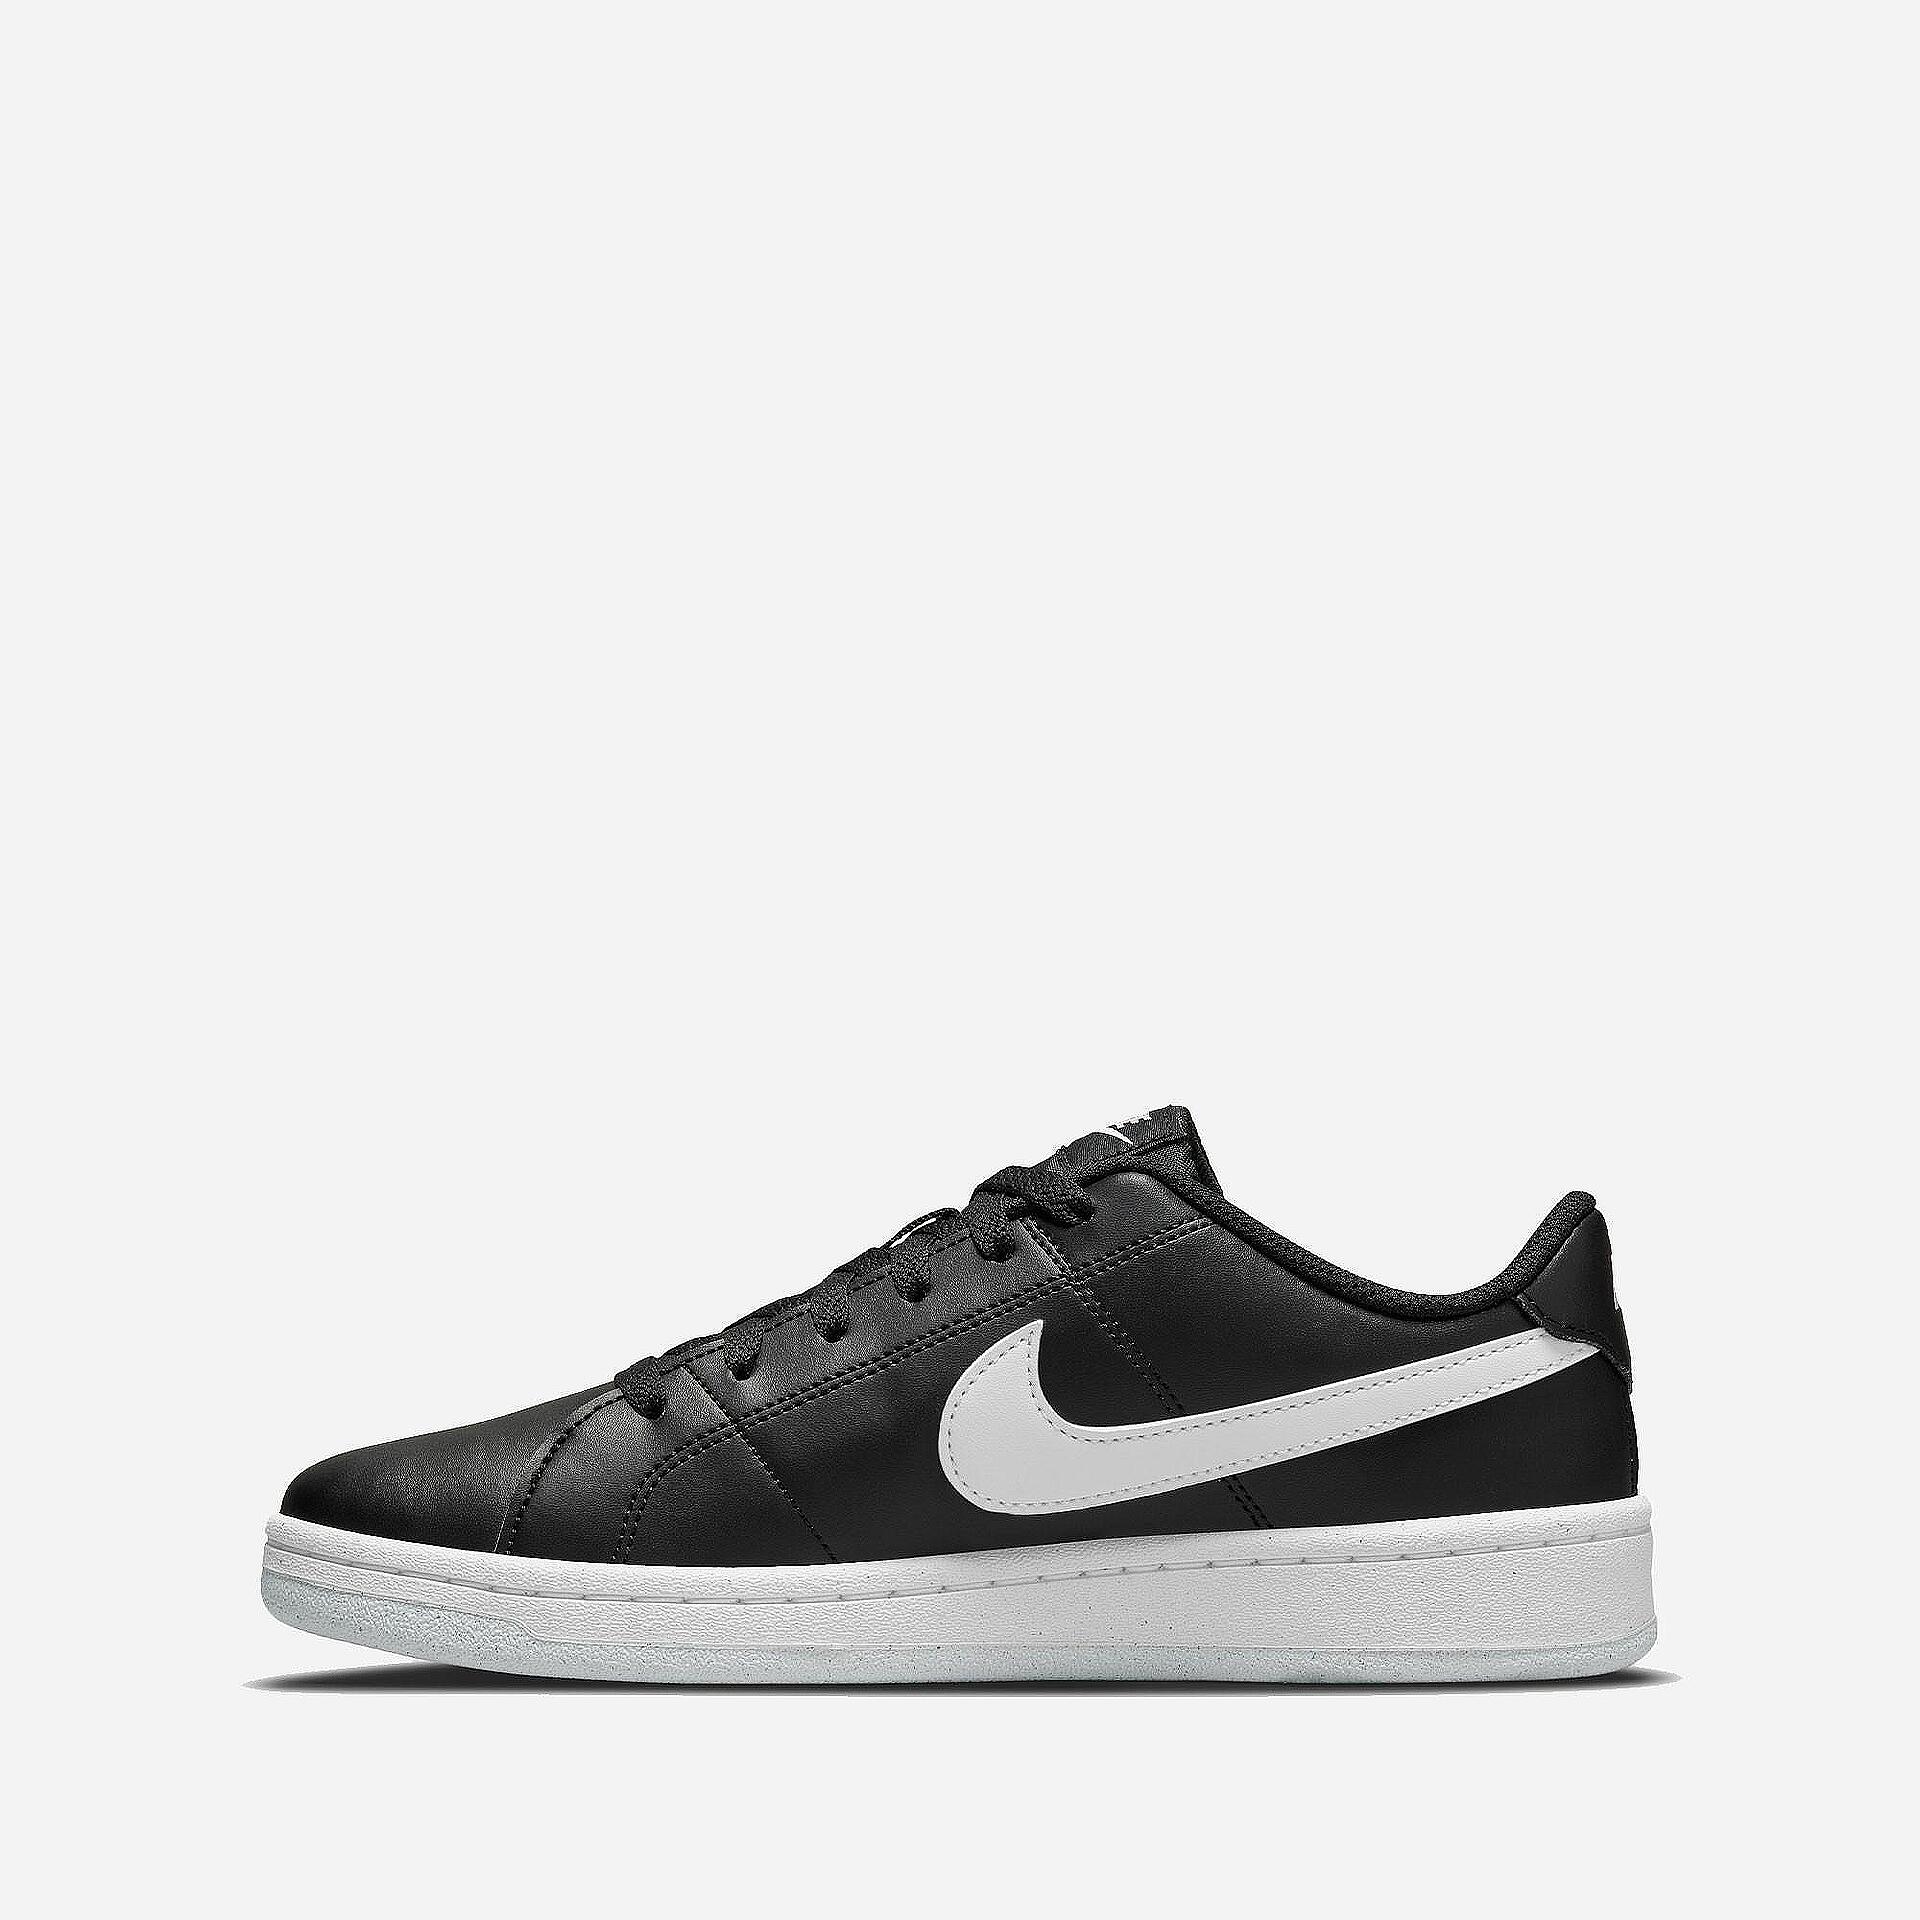 NIKE COURT ROYALE 2-DH3159-001